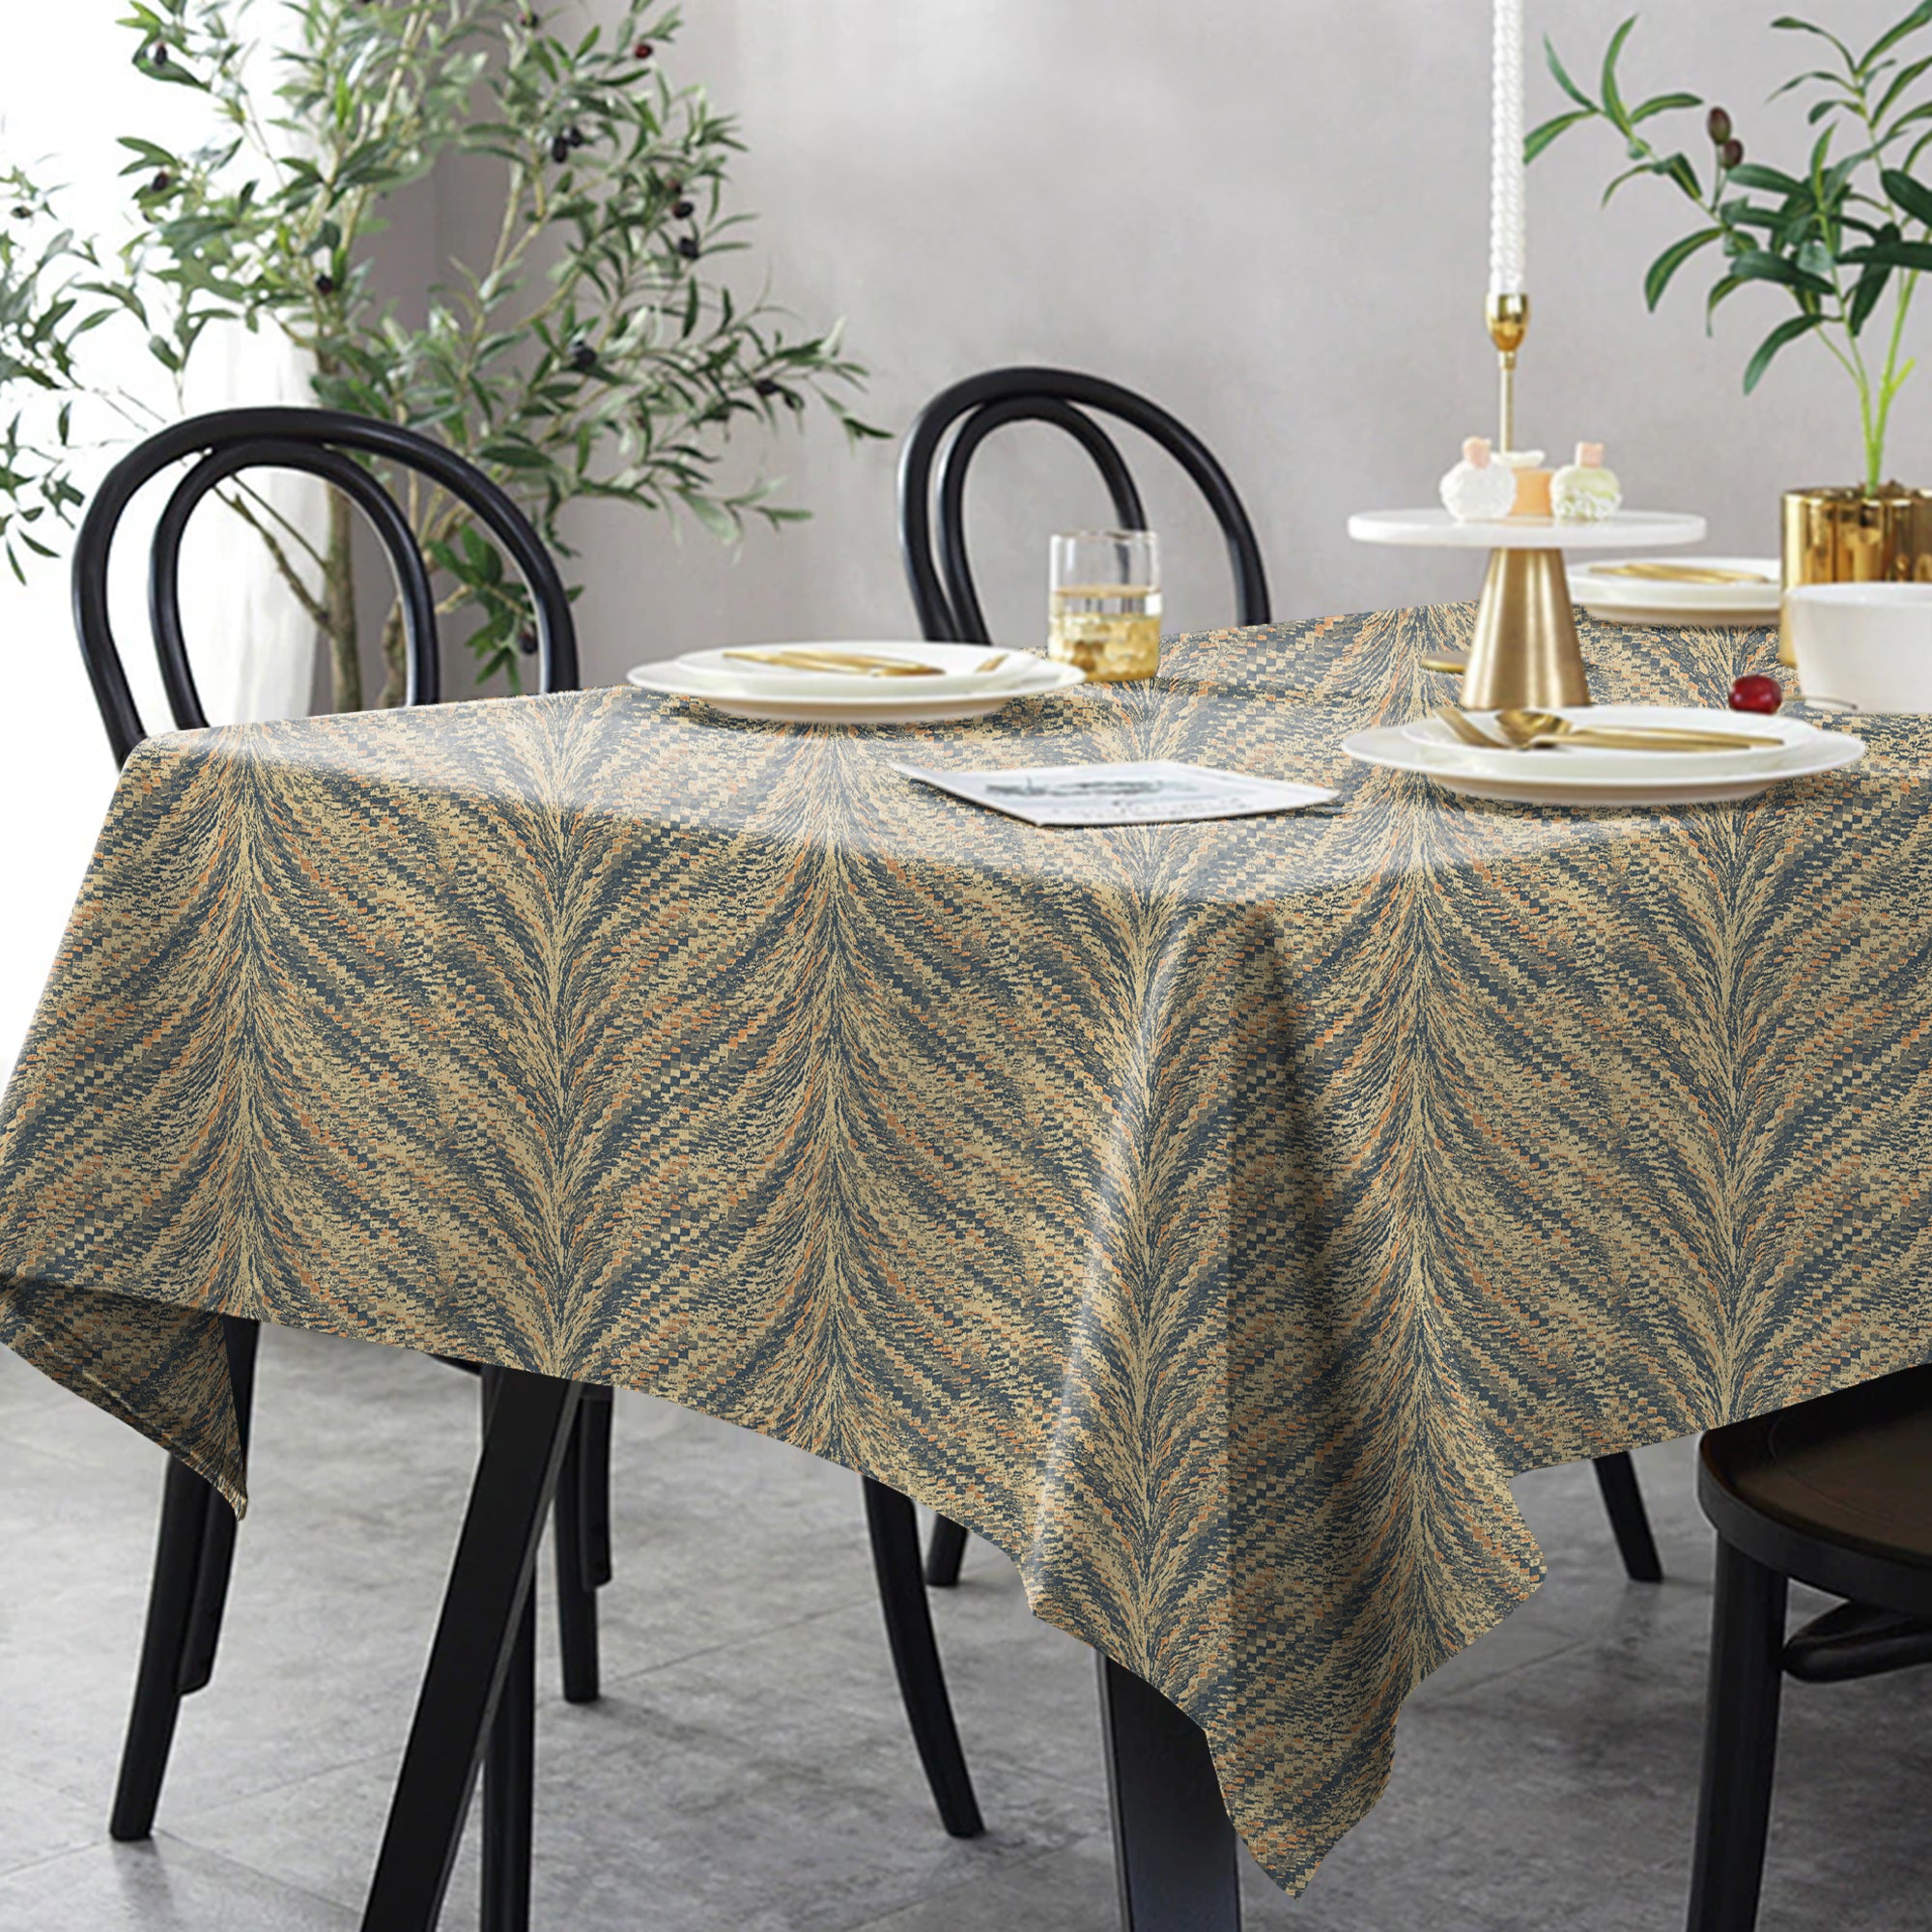 Luxor Amethyst 6 Seater Table Cloth